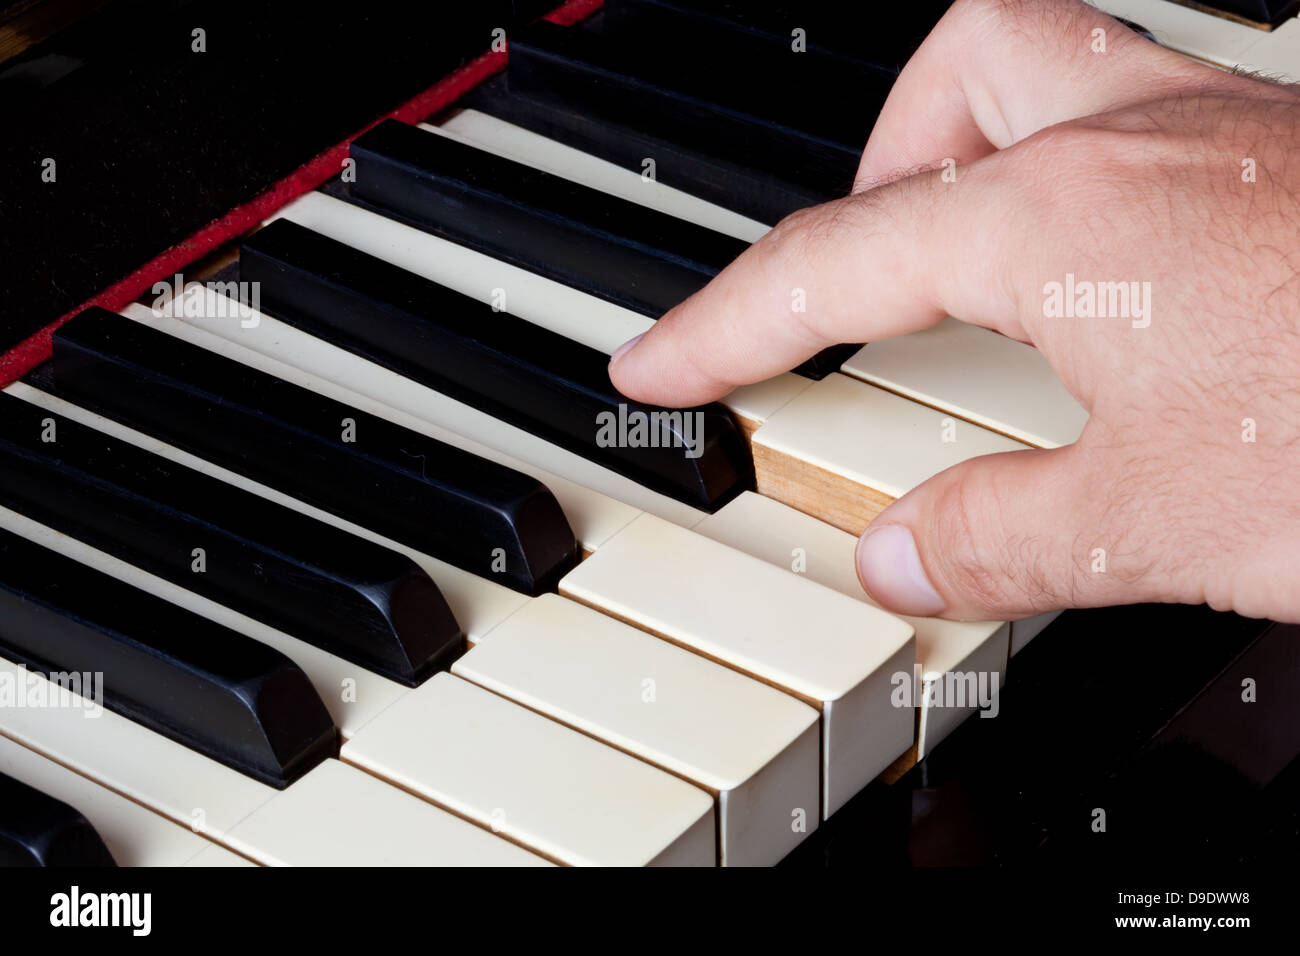 Piano keyboard made of ivory with hands. Stock Photo